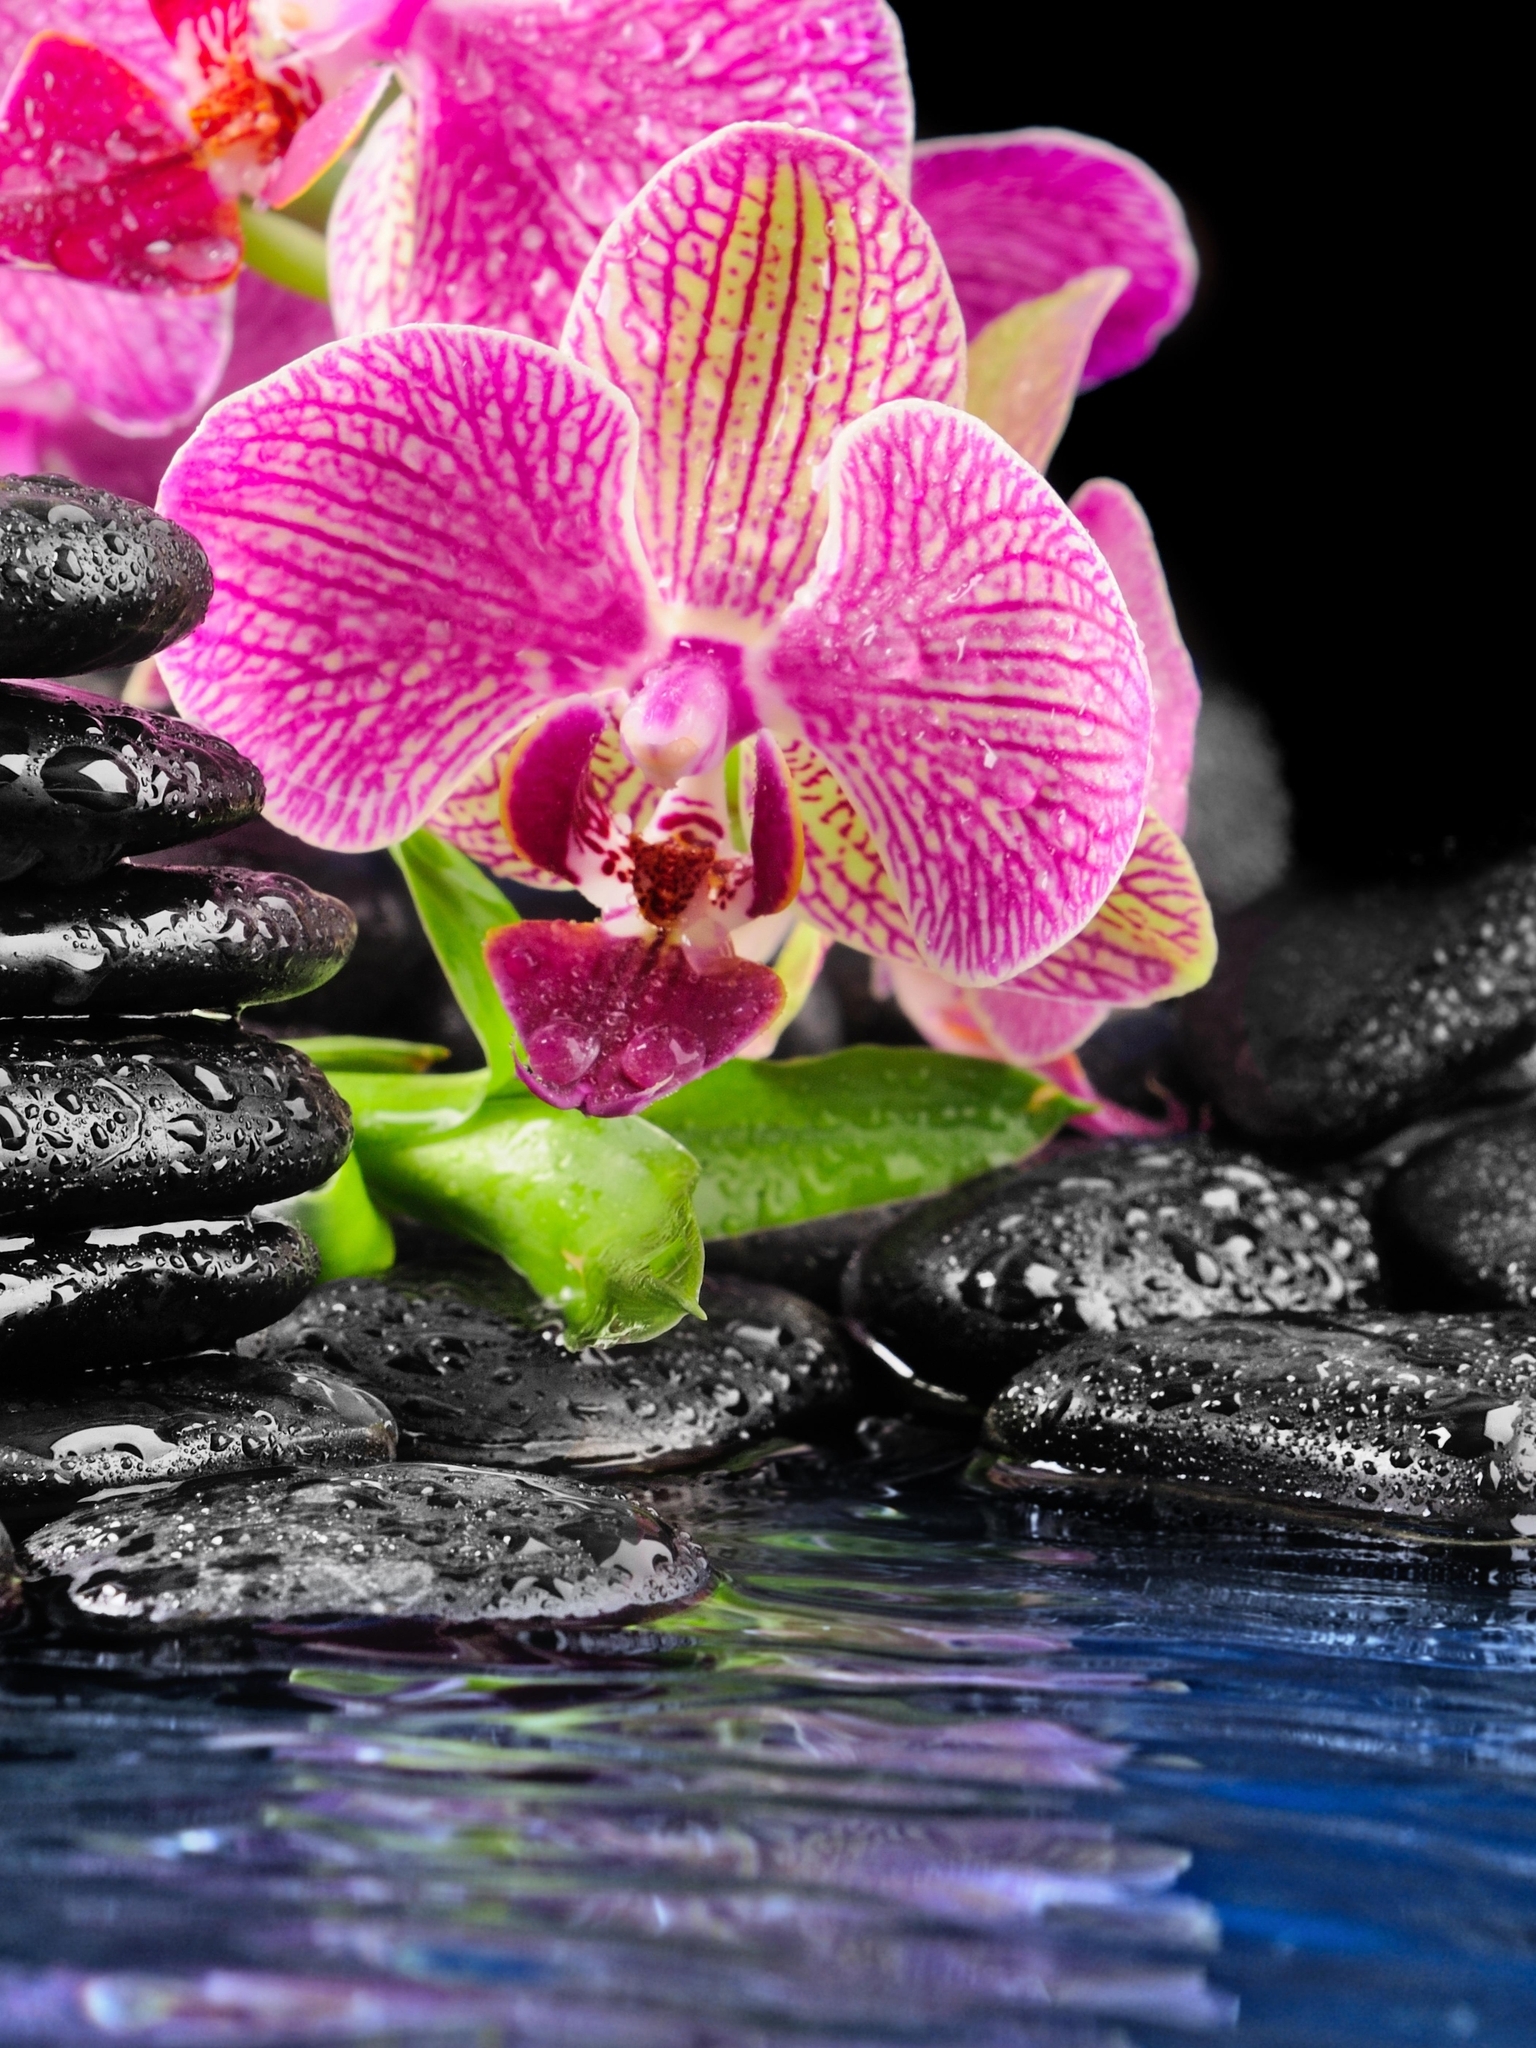 Image: Flowers, Orchid, stones, water, spray, drops